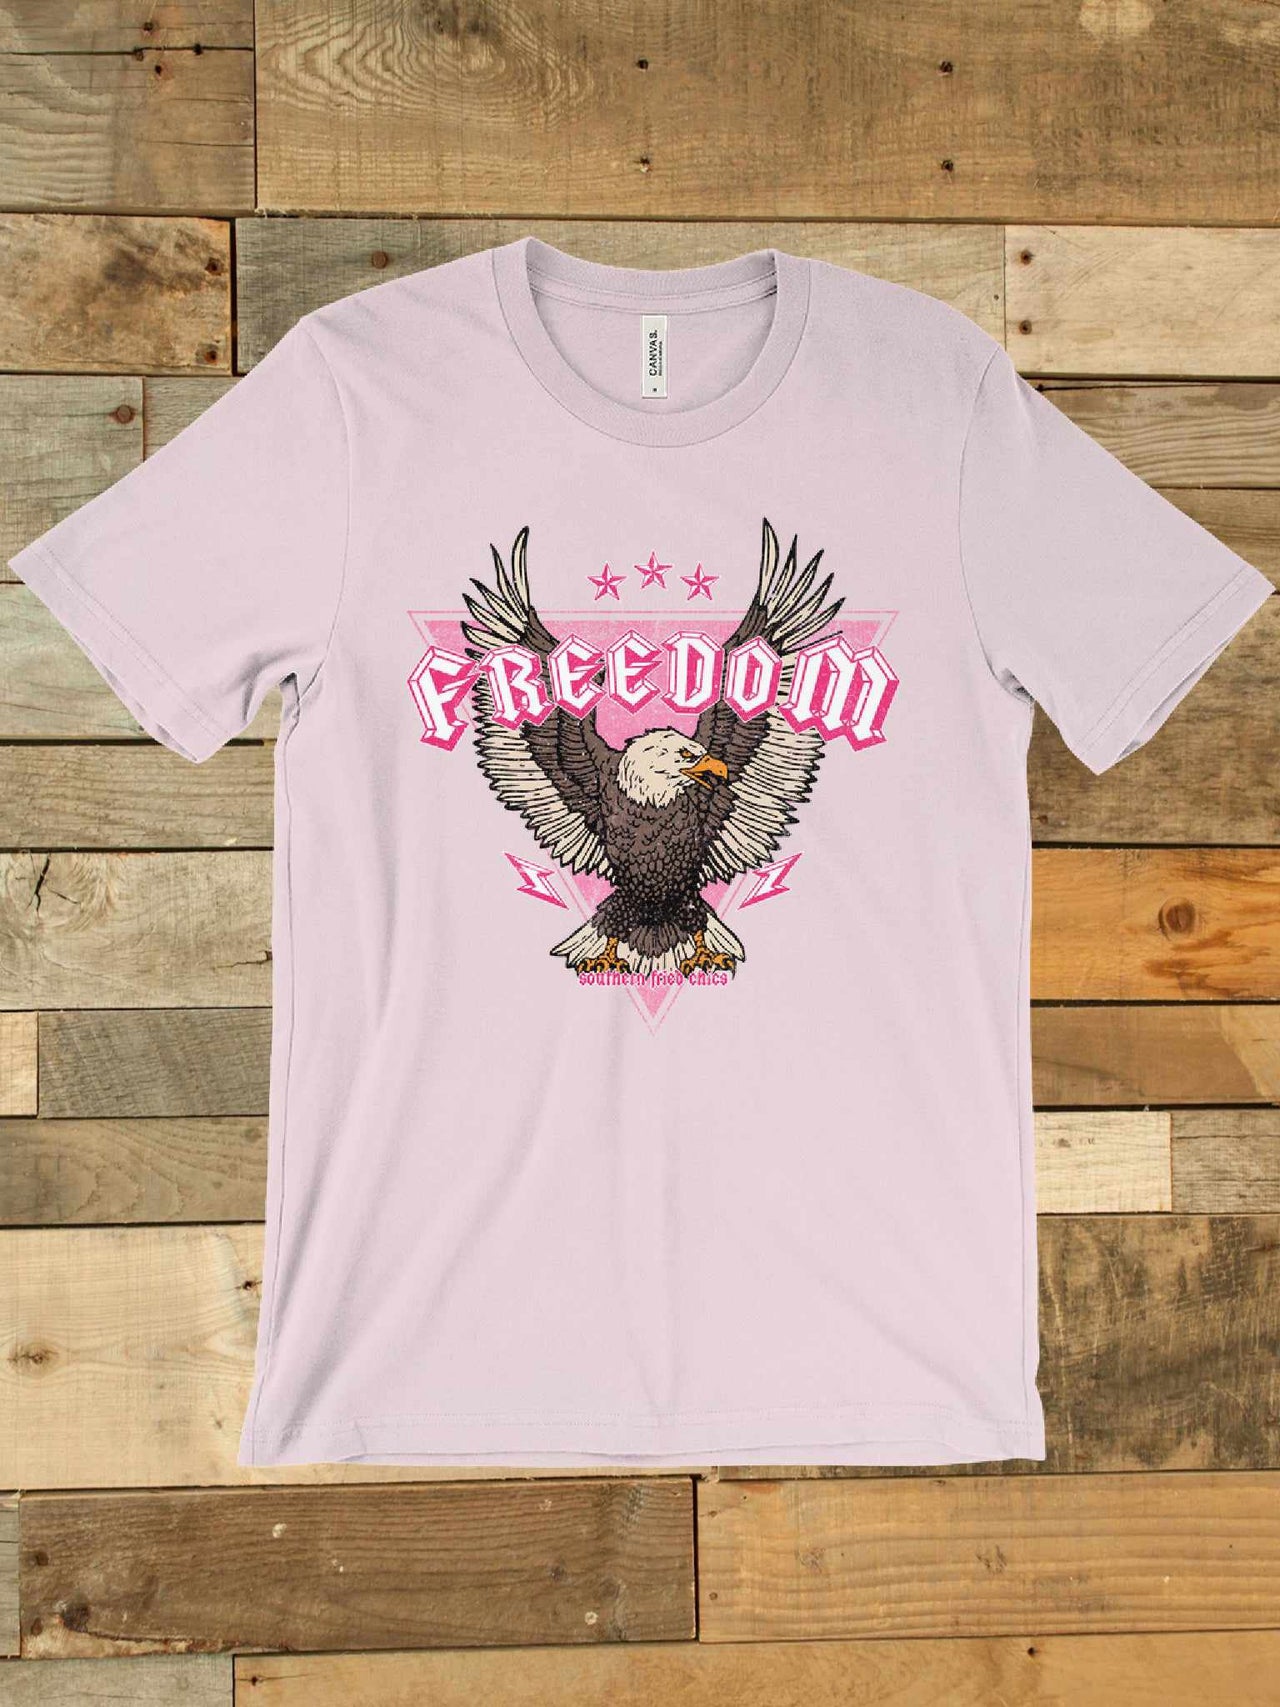 Freedom patriotic t-shirt with eagle graphic.